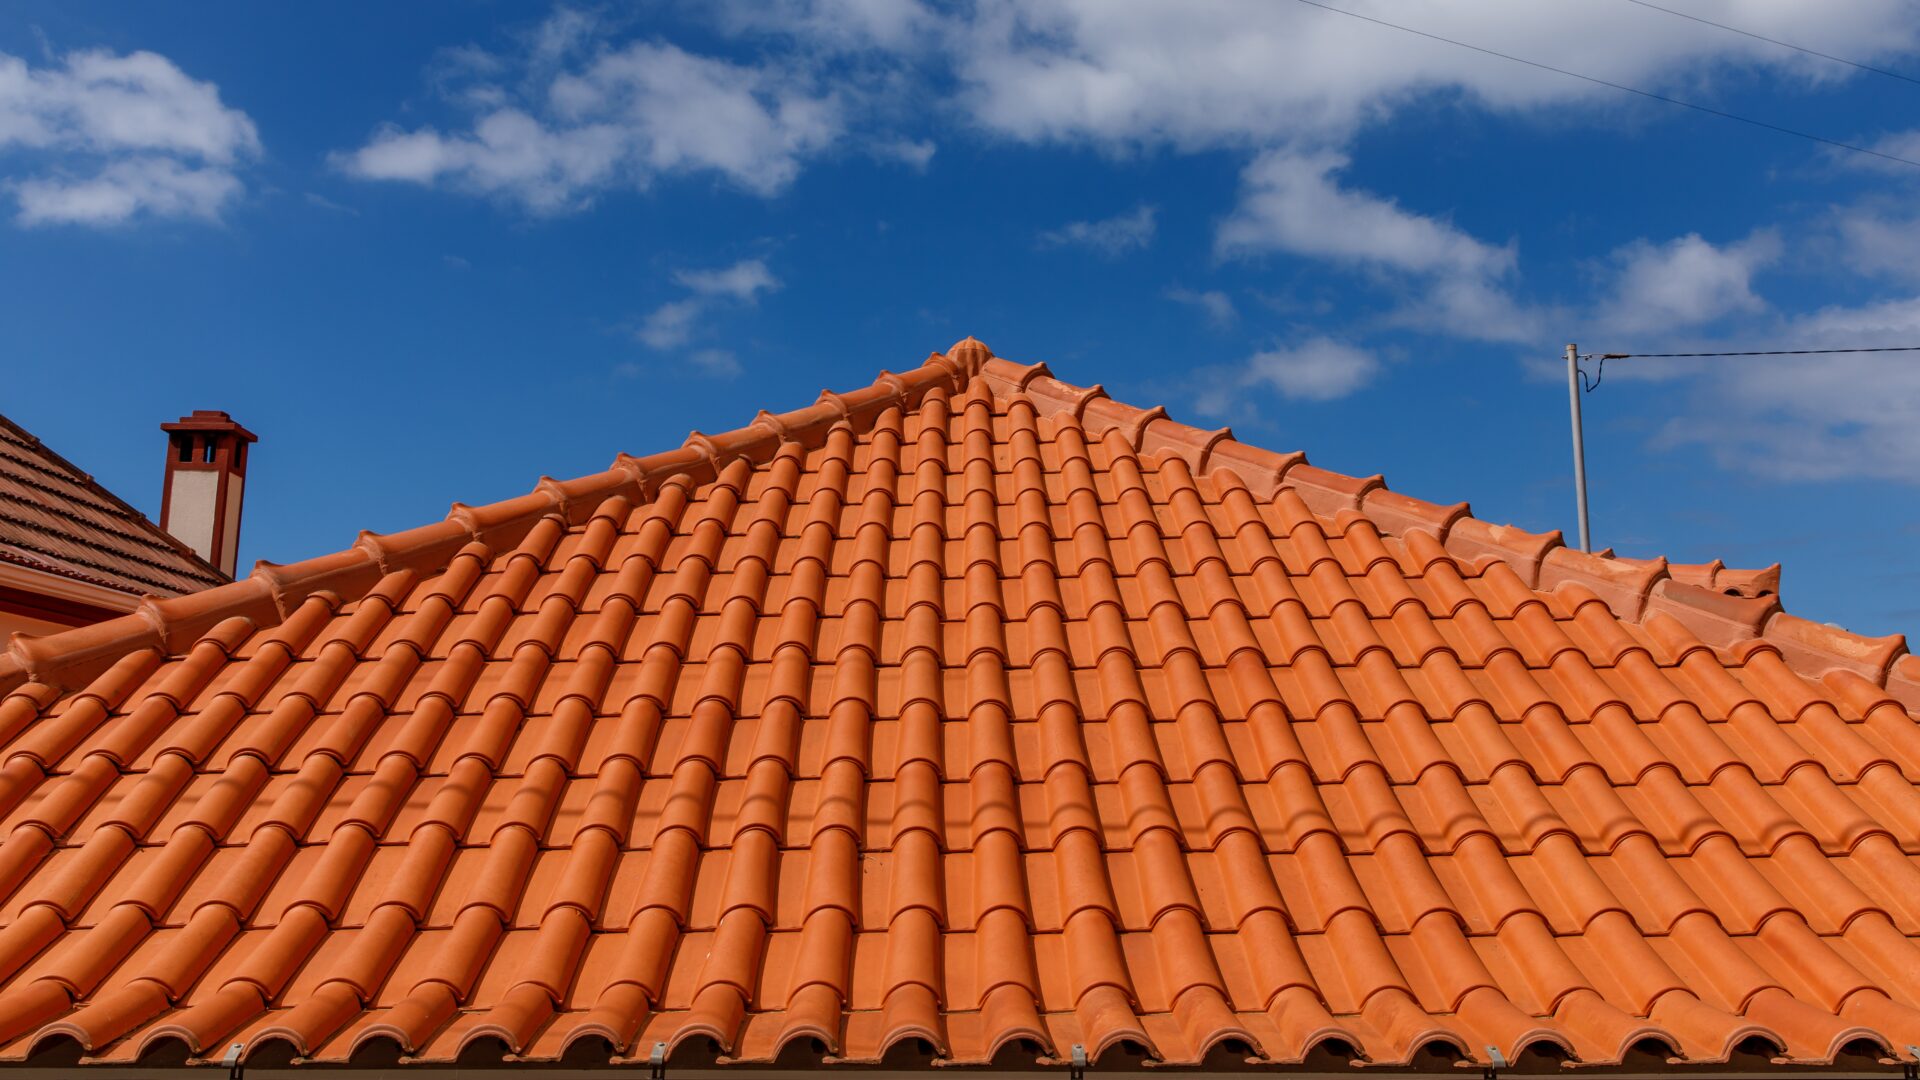 Closeup of a red tile roof